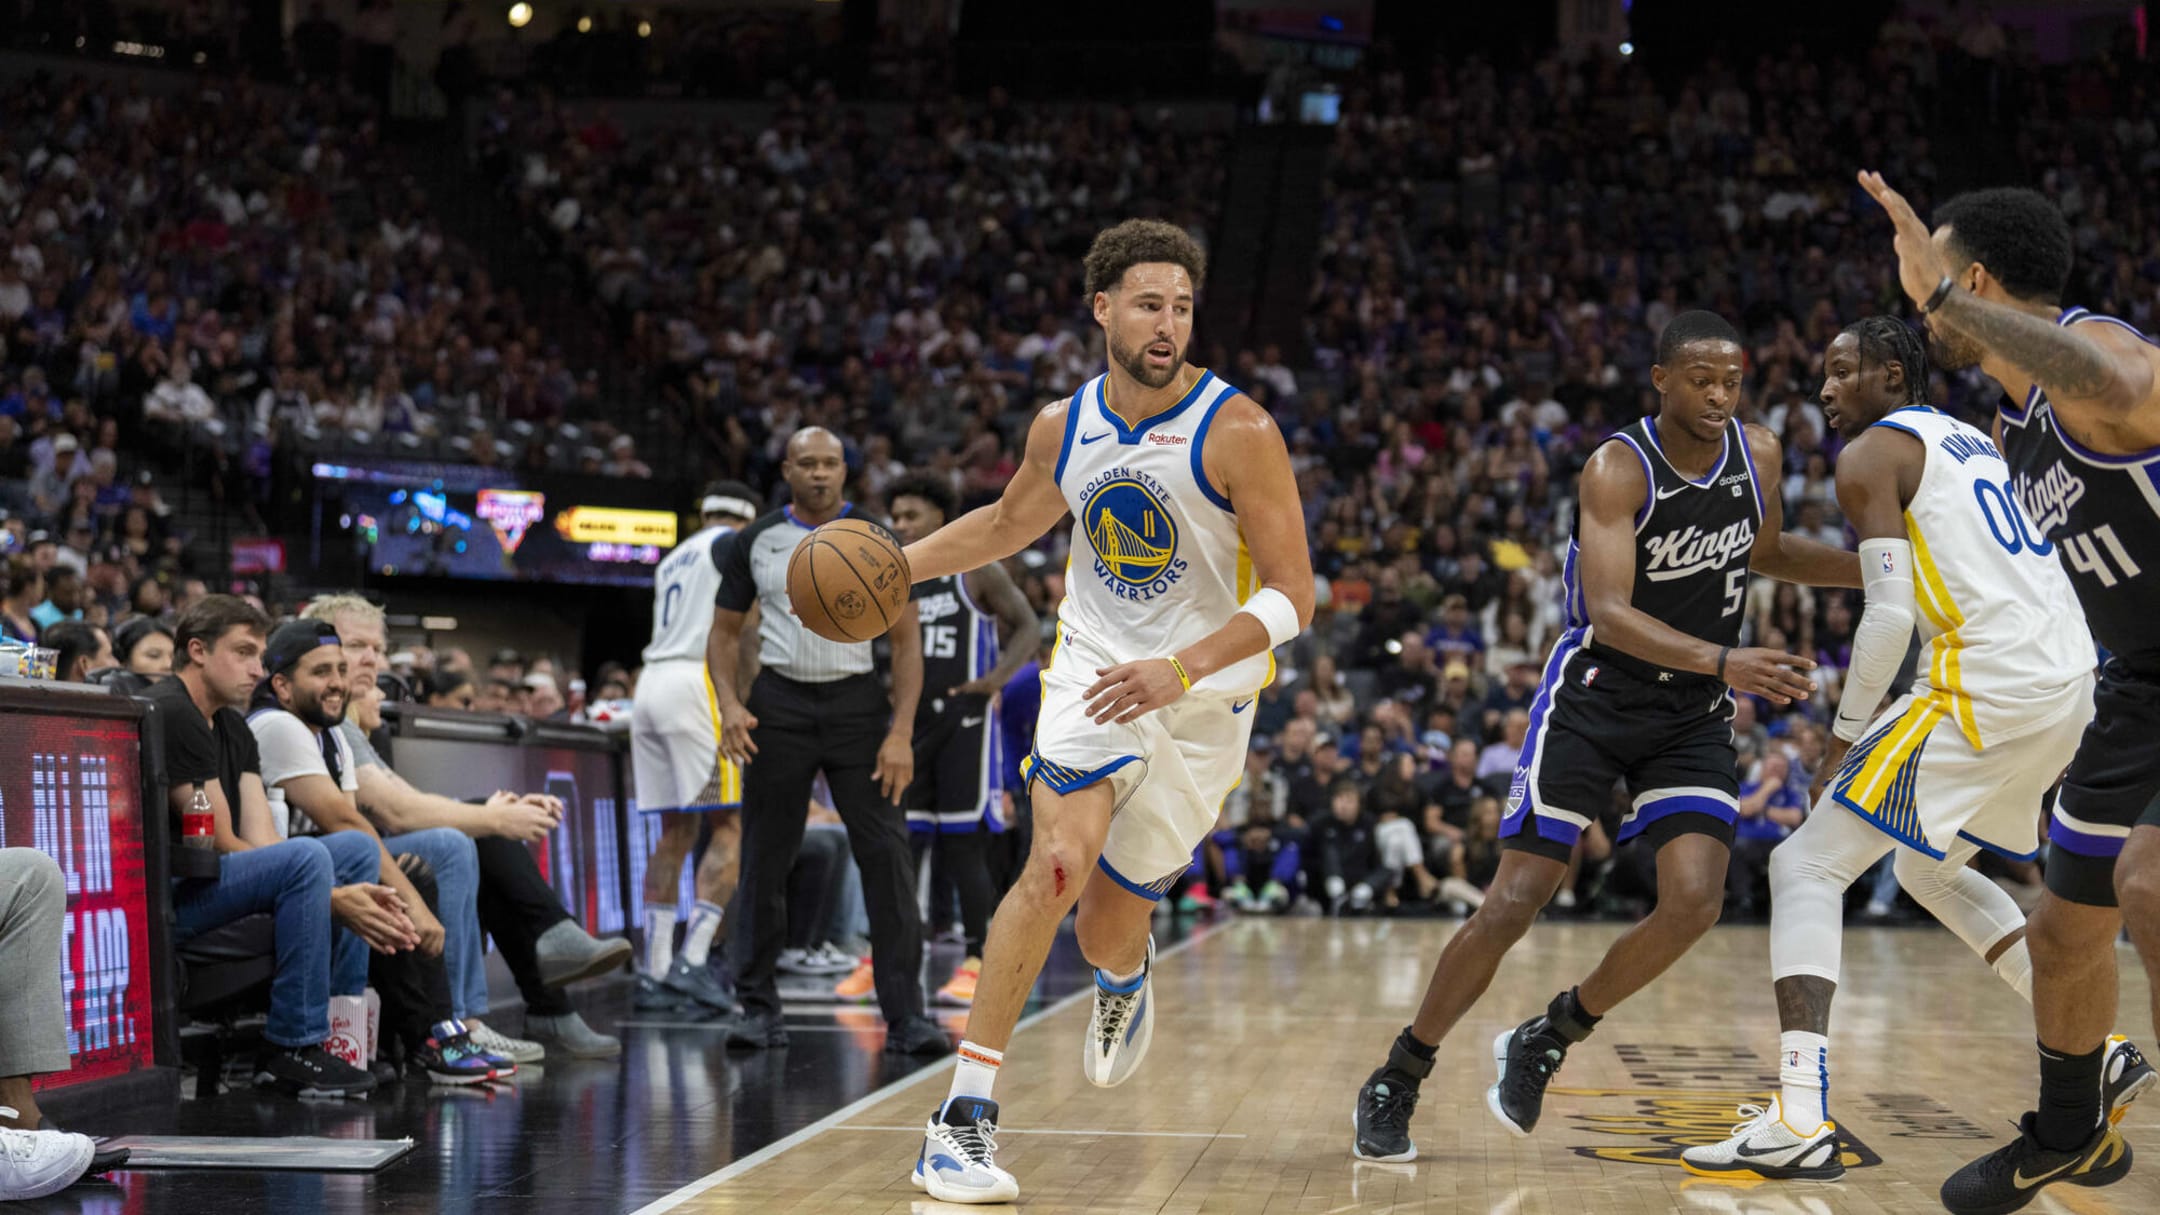 Klay Thompson talks about his shoe deal - Basketball Network